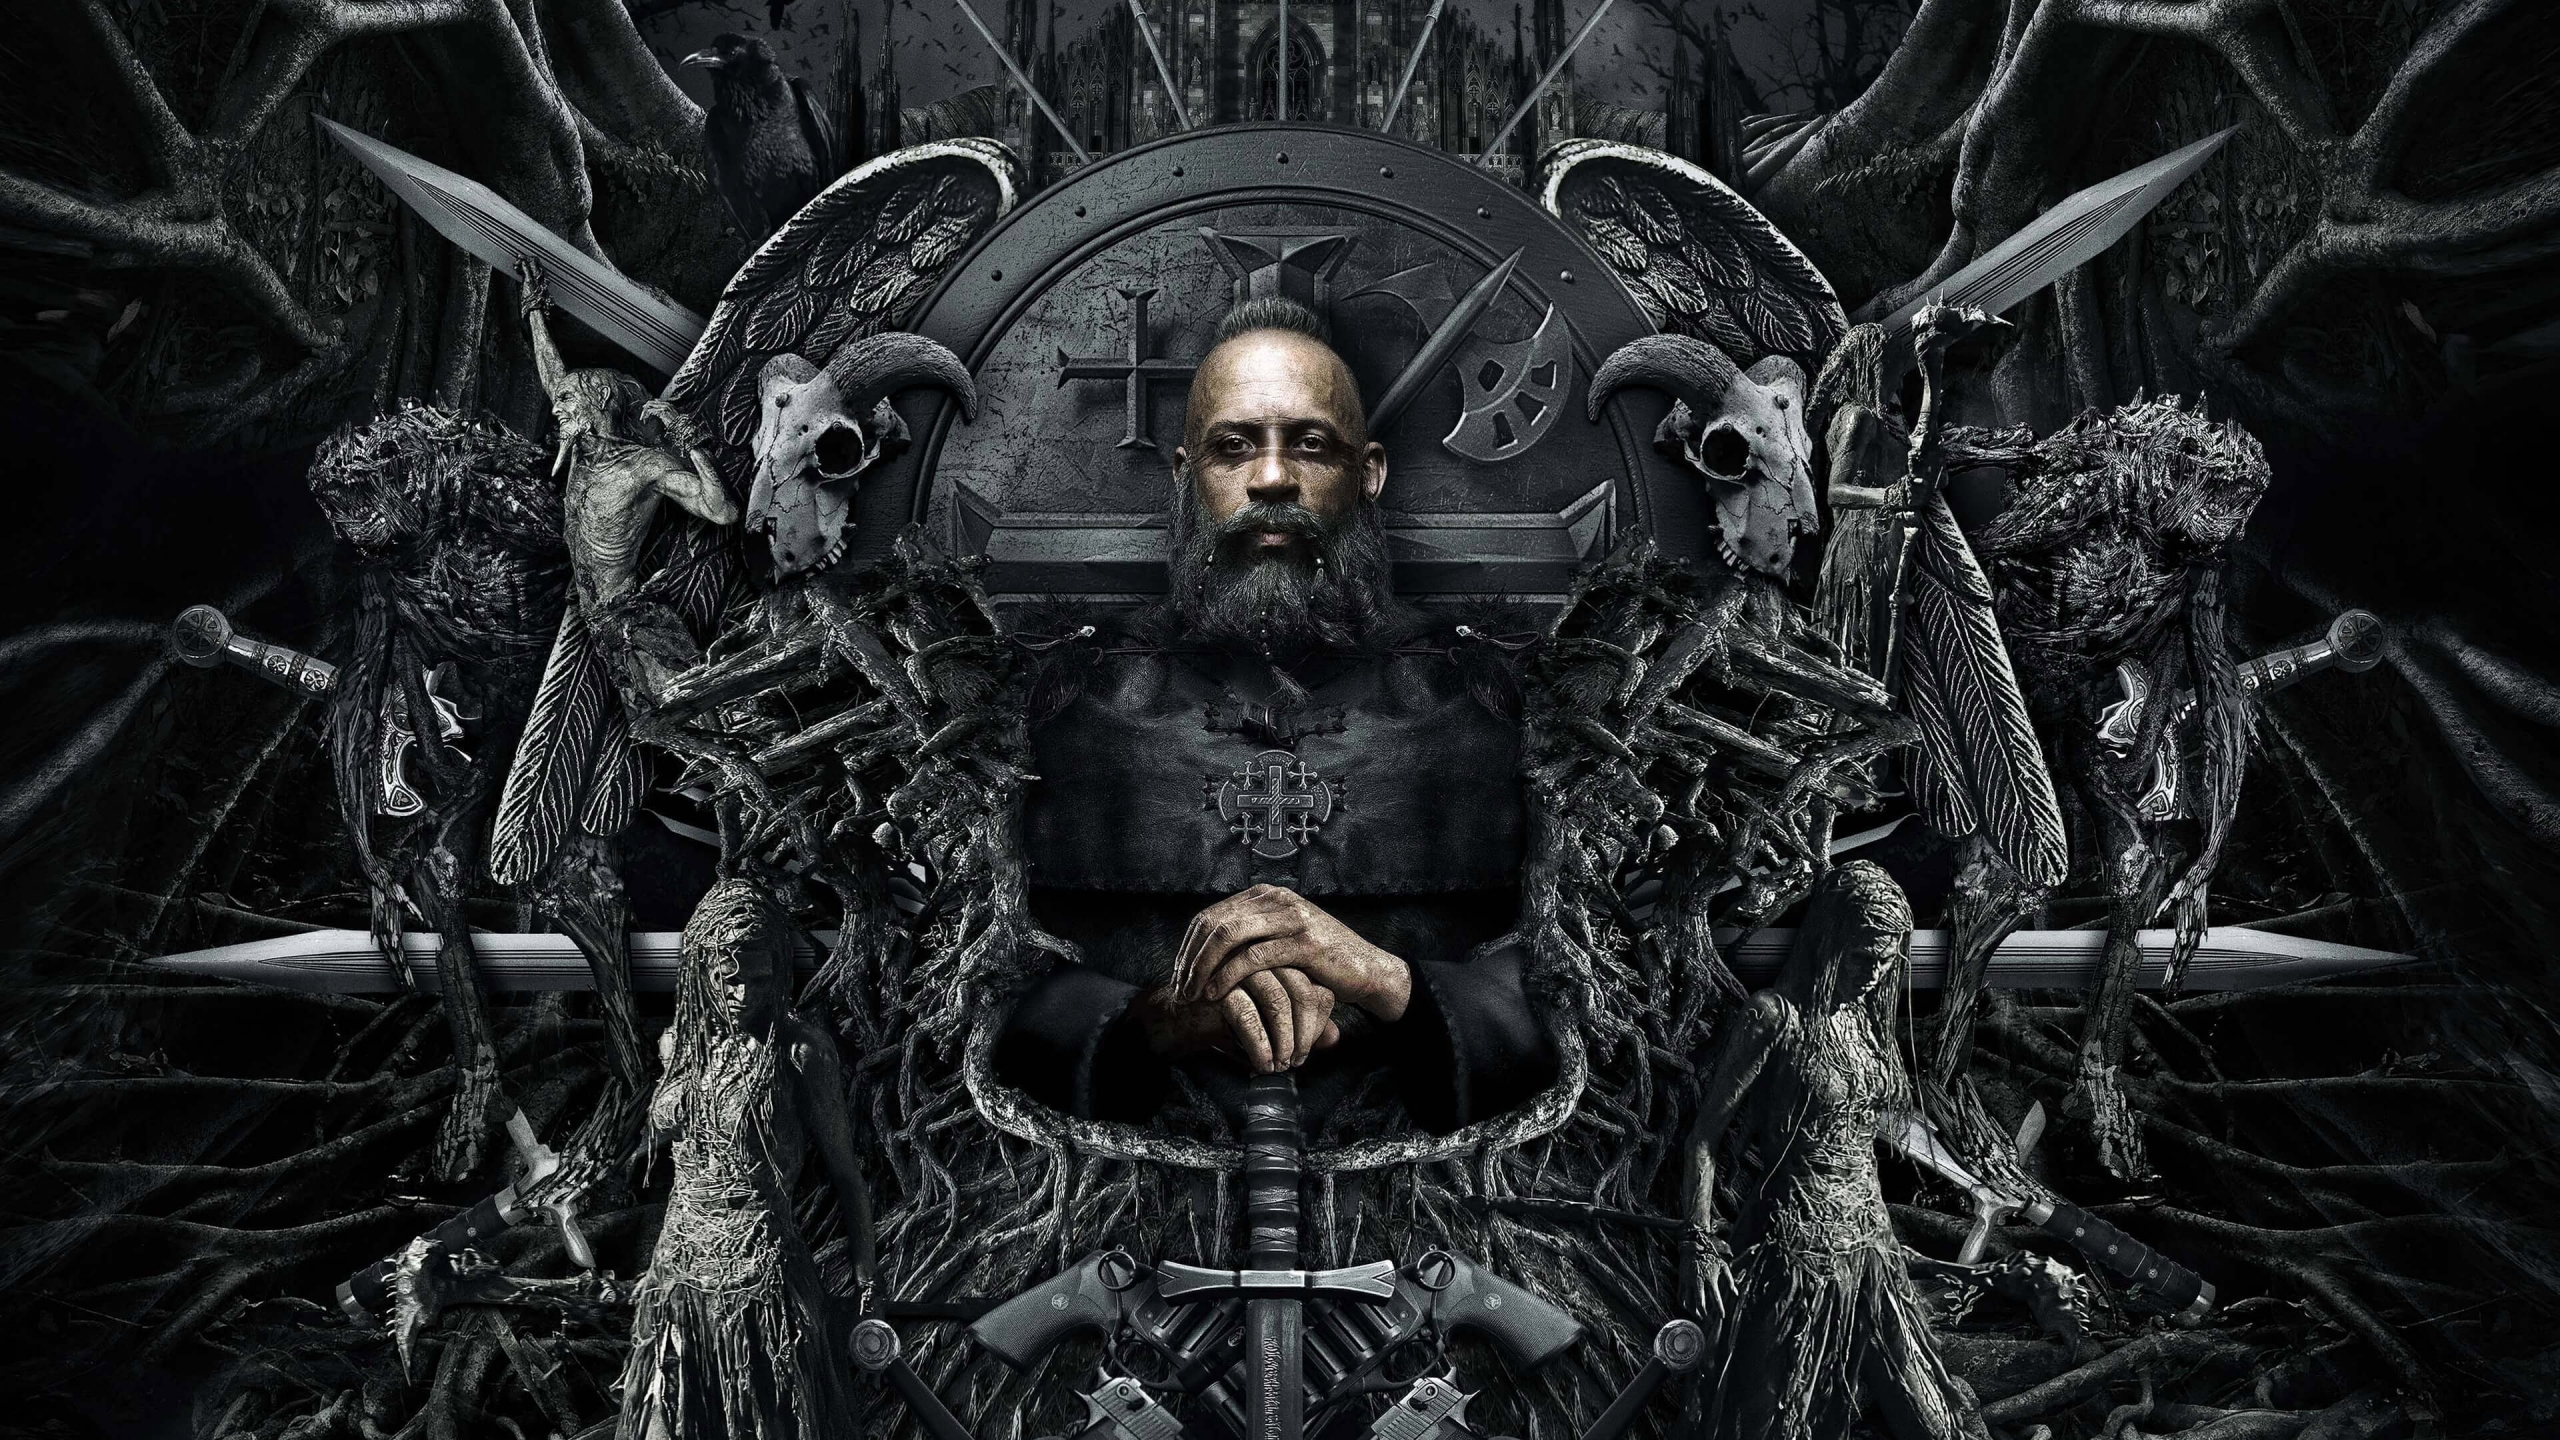 The Last Witch Hunter Throne for 2560x1440 HDTV resolution